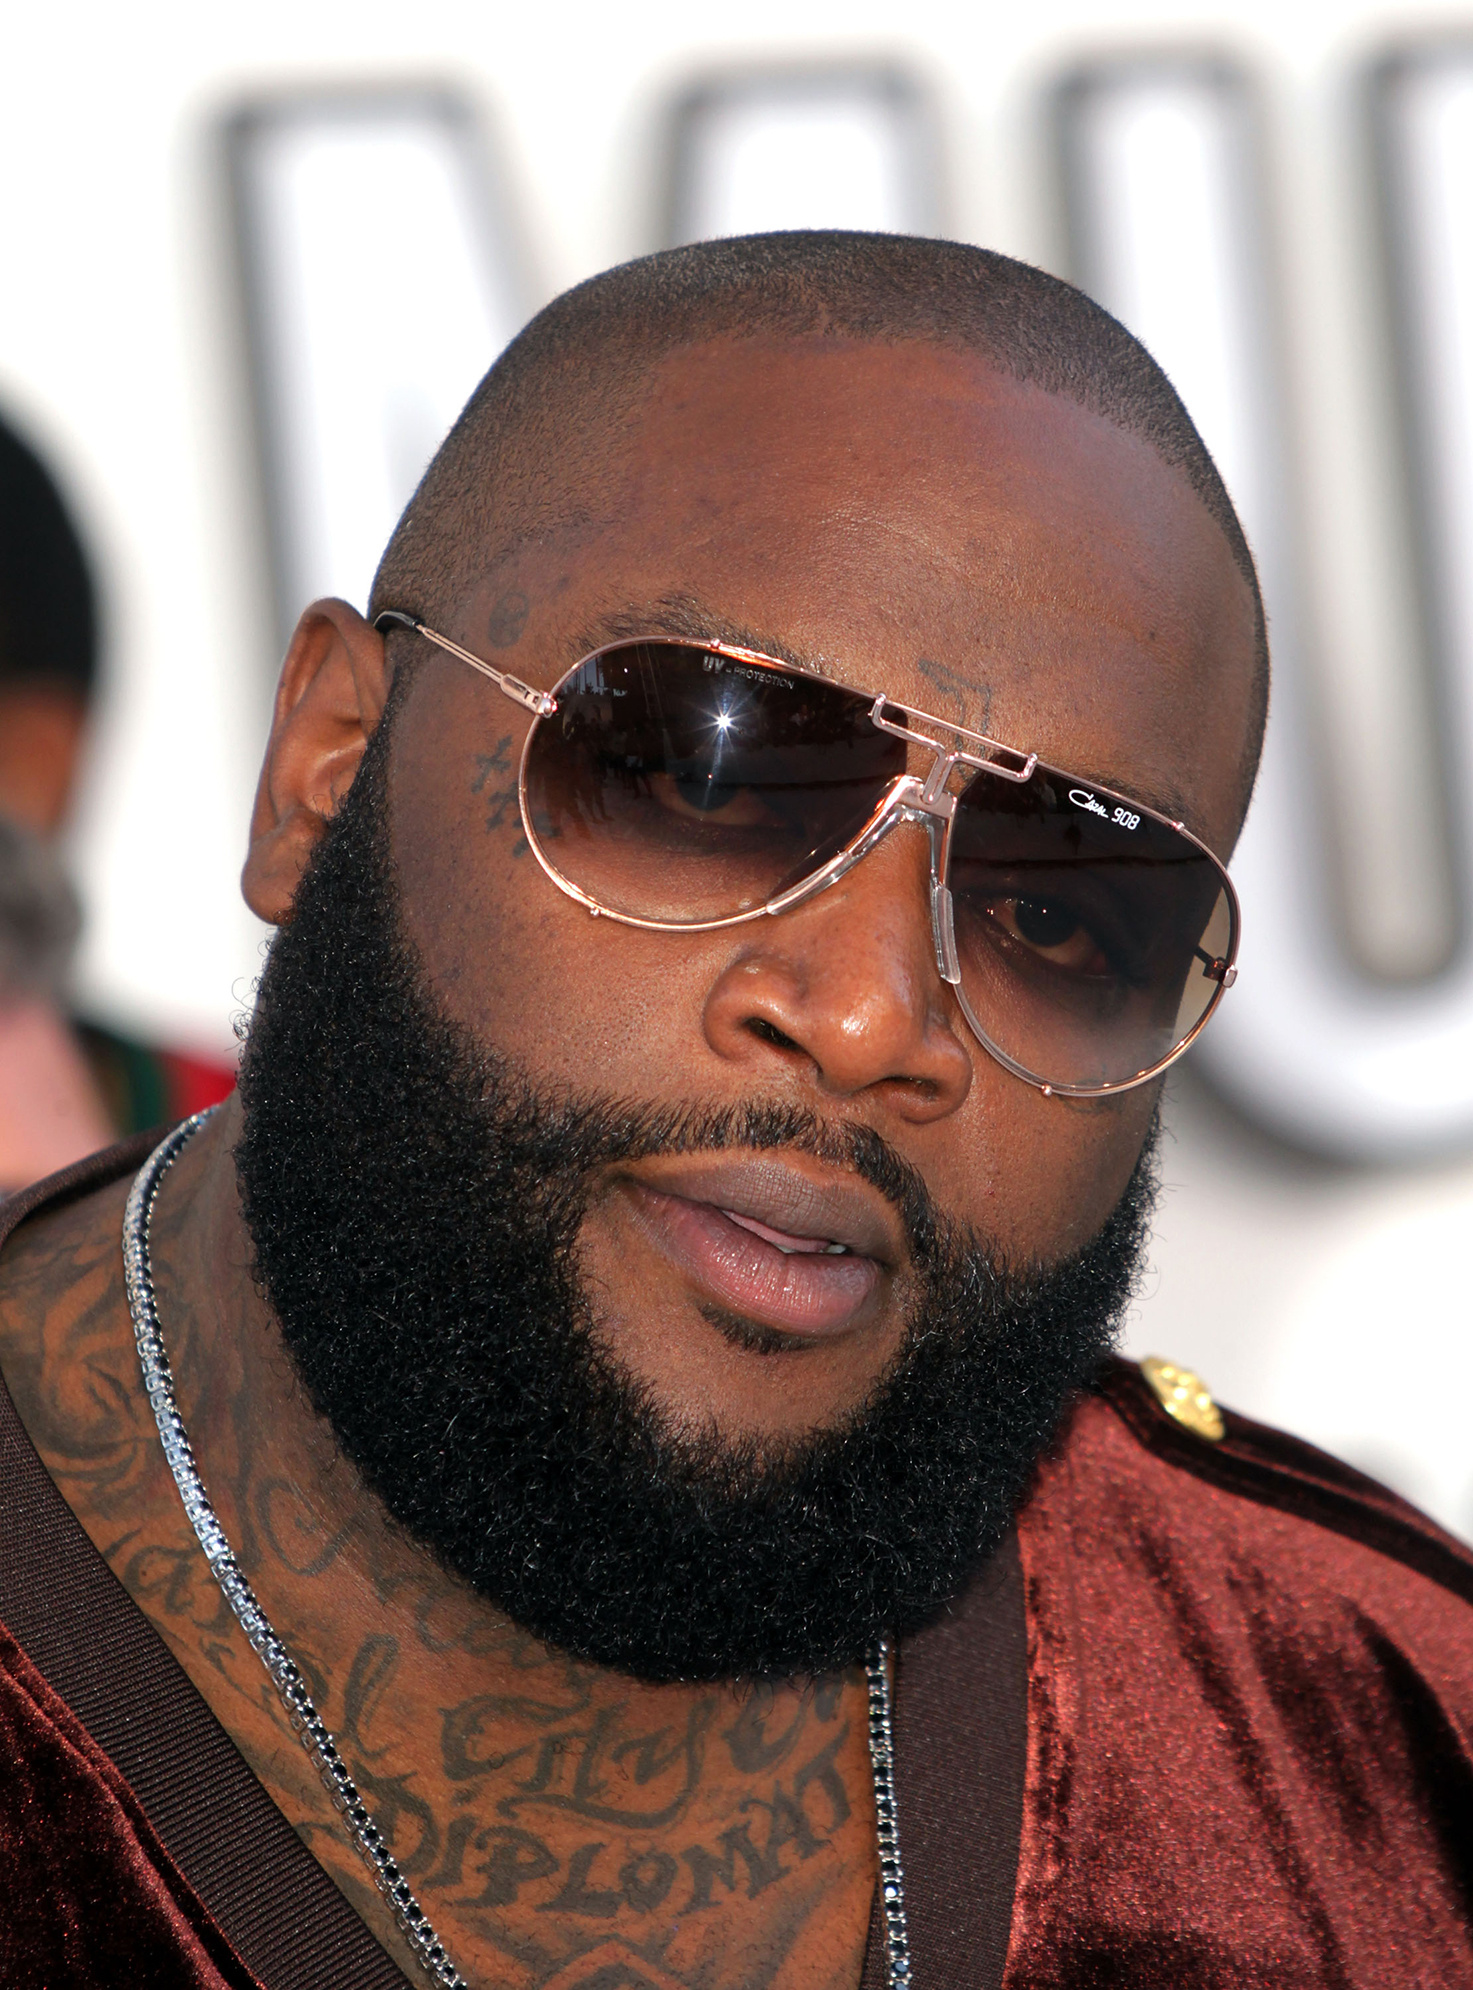 Top 25 Best Rick Ross Songs of All Time - Abegmusic 1480x1990